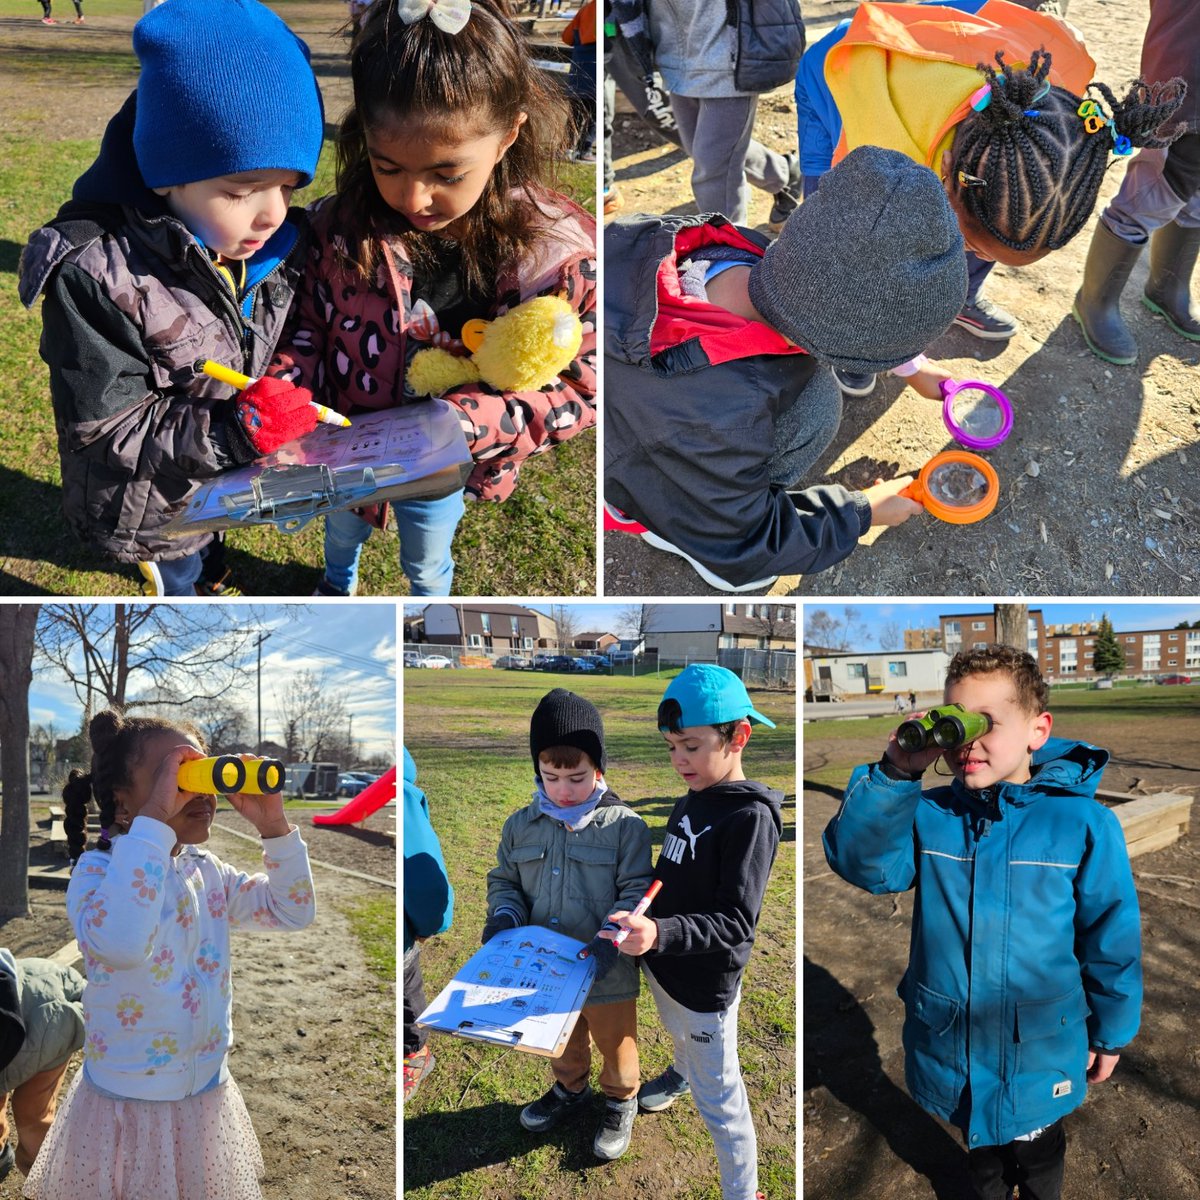 La chasse au trésor! It was a beautiful day to look for signs of 'le printemps' during outdoor Learning this morning! @StRitaOCSB @ocsbBonjour @ocsbEco